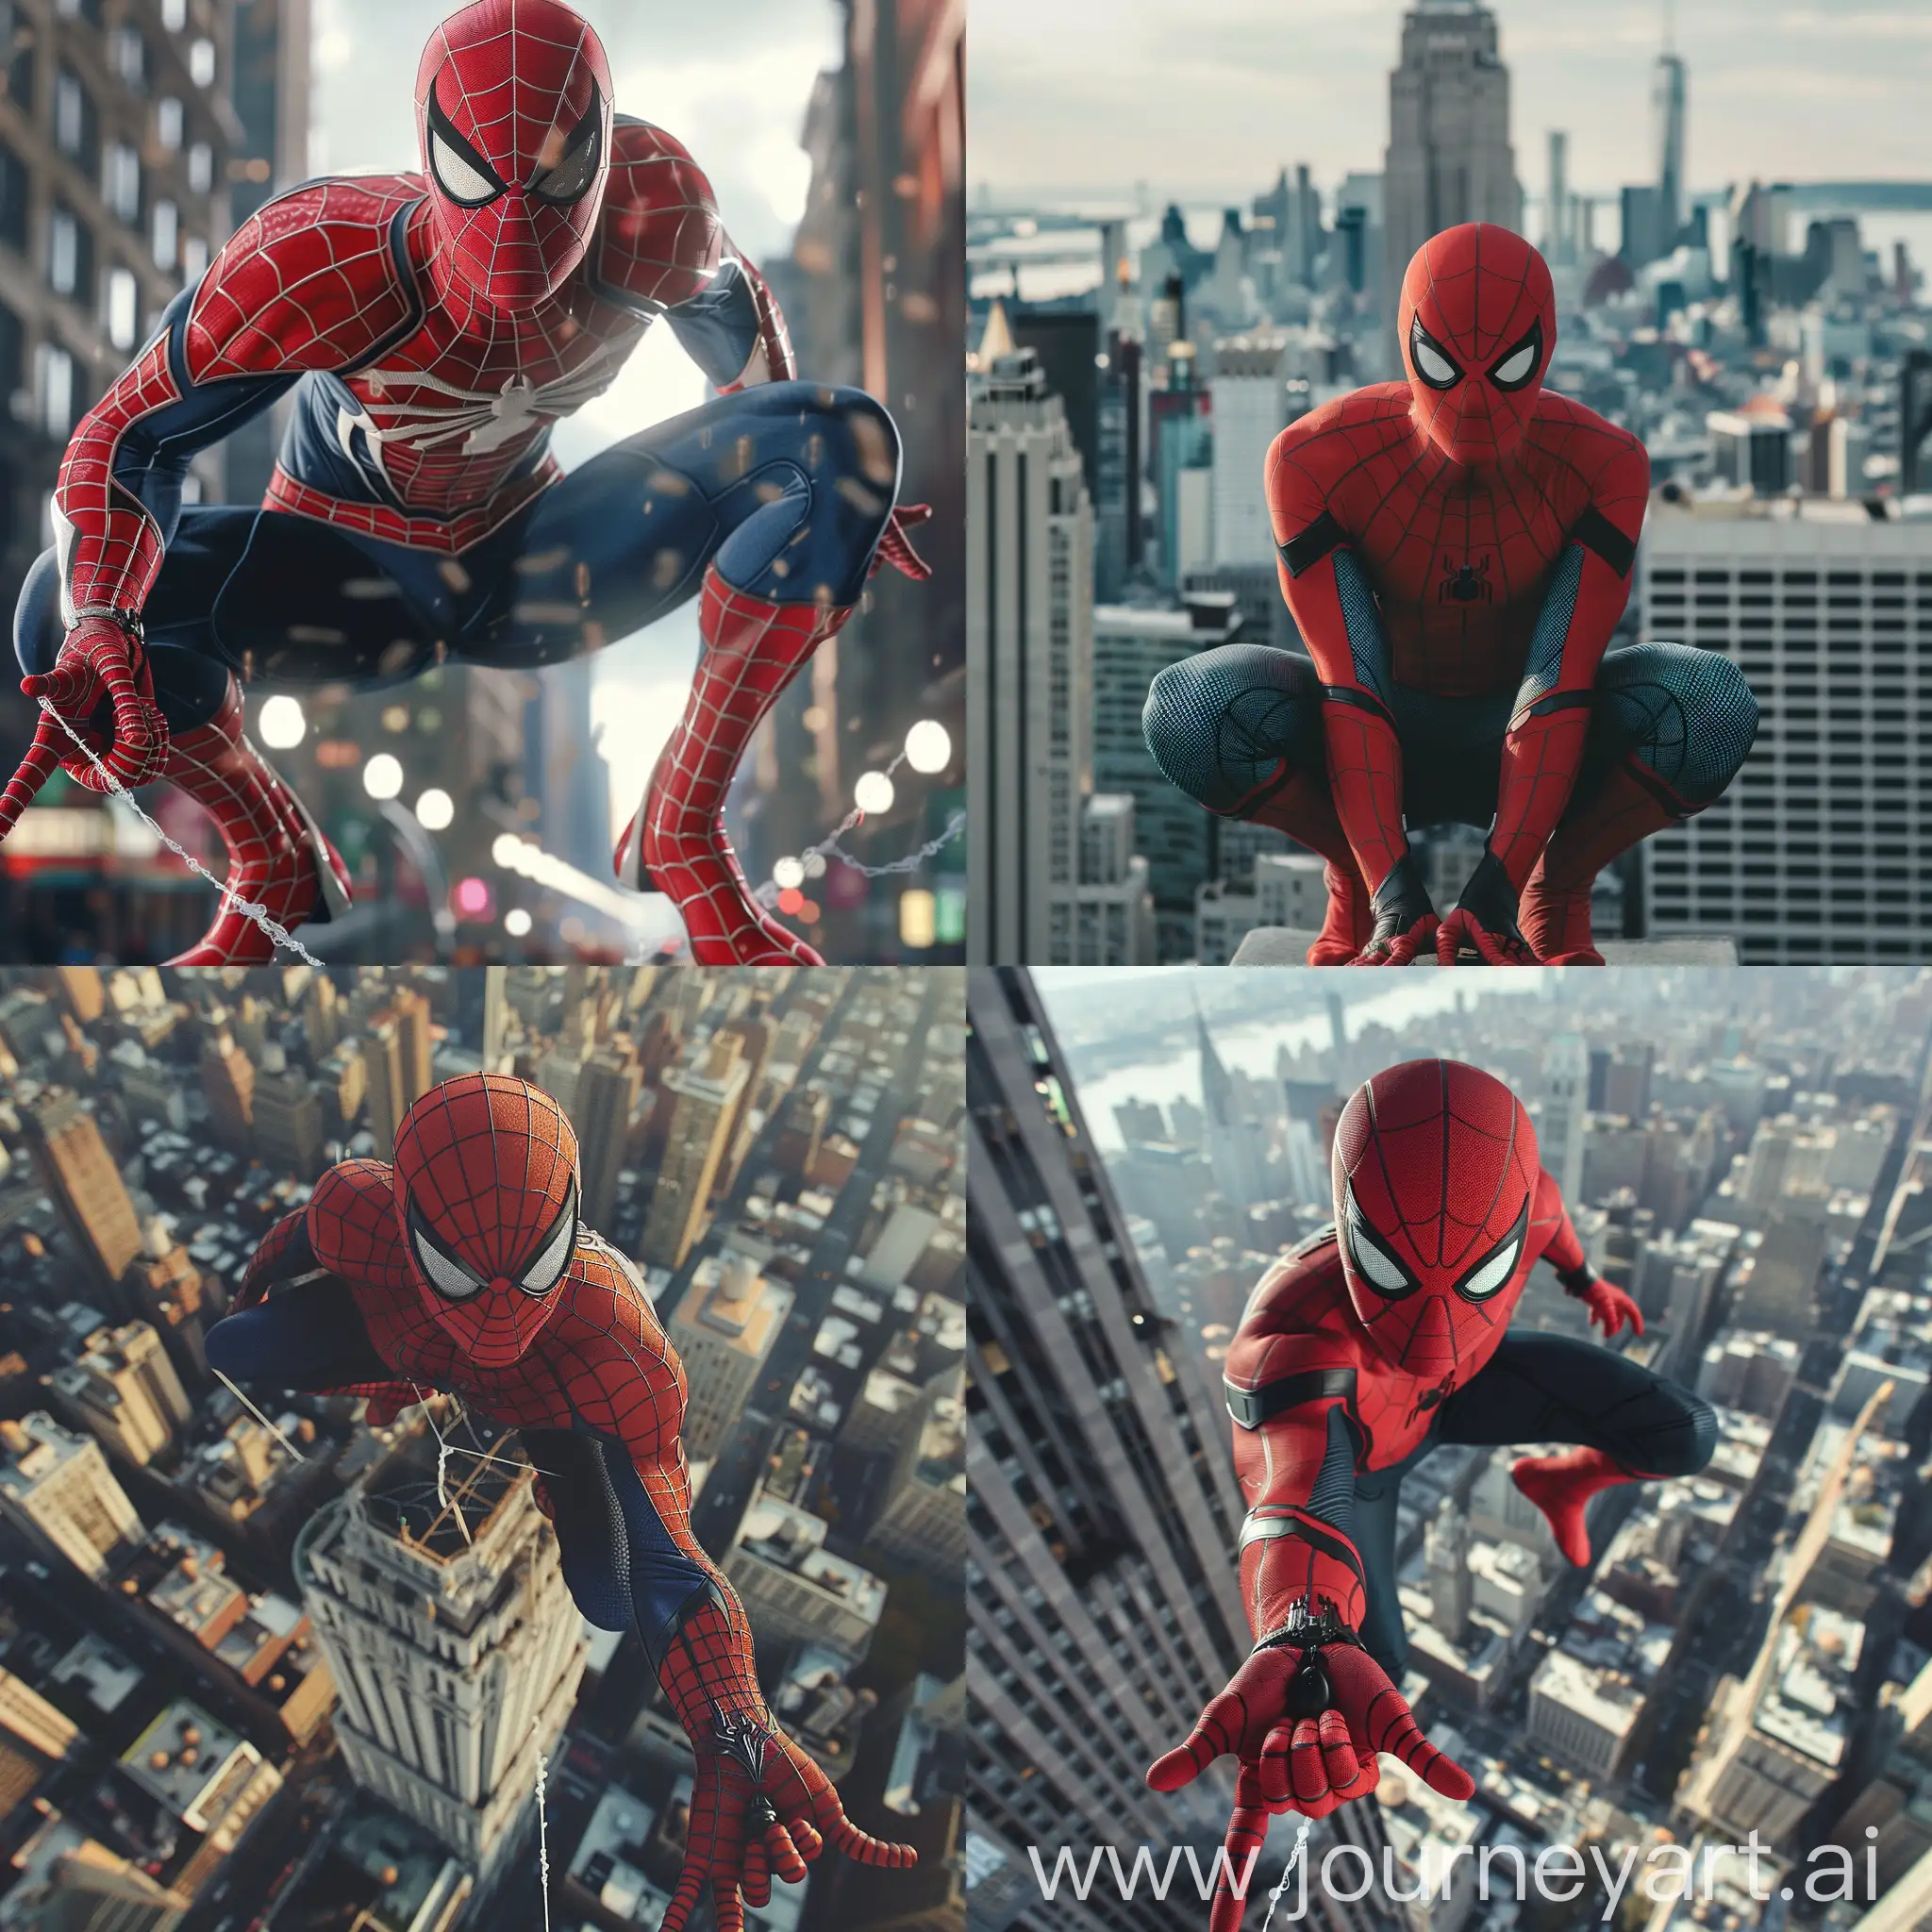 create a image of spider-man from New York  City